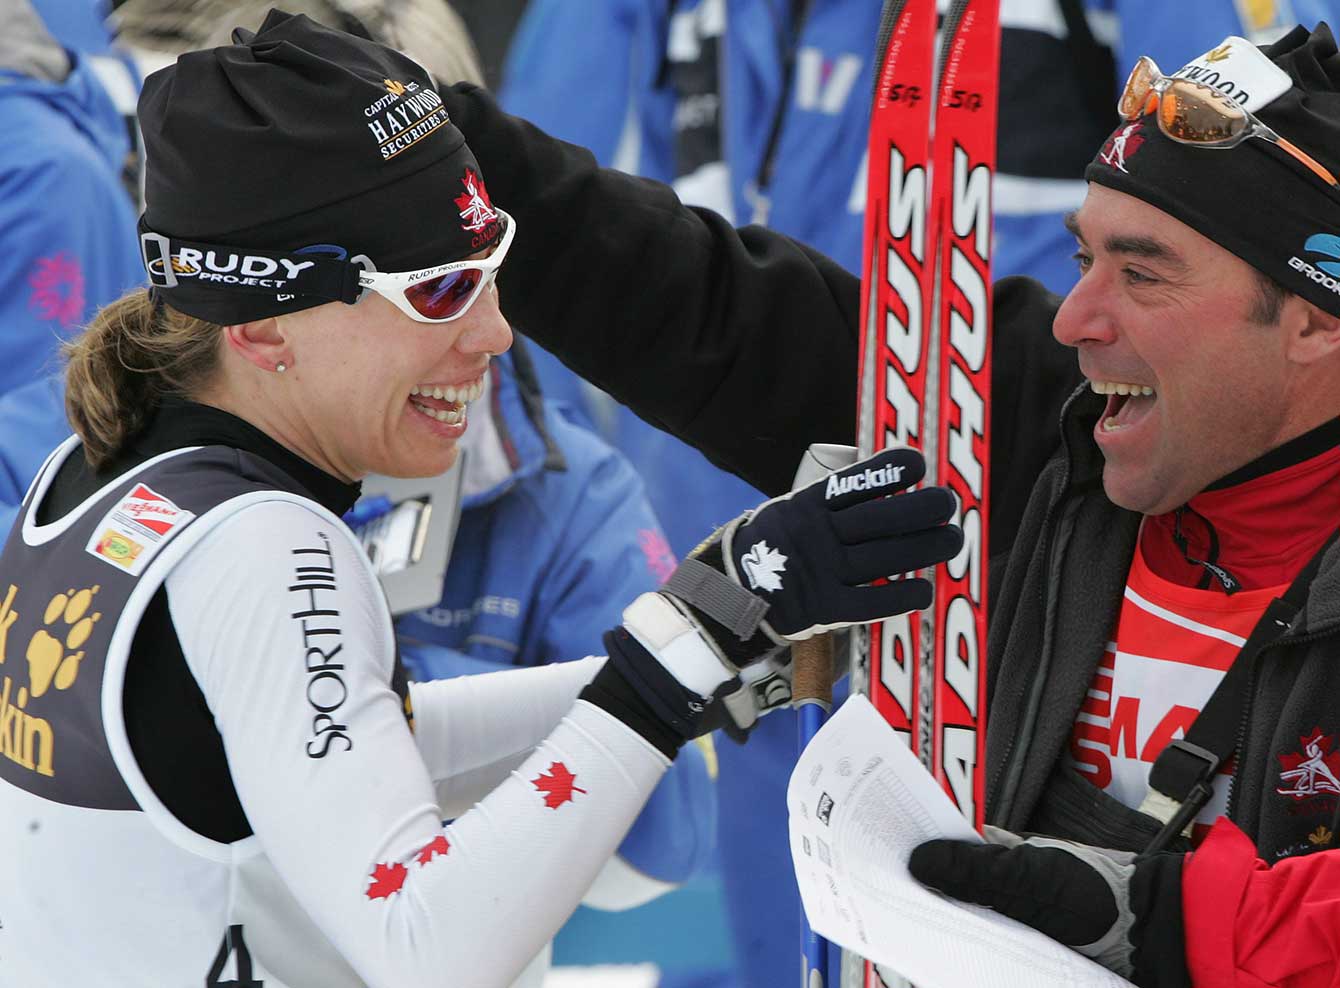 Canada's Beckie Scott celebrates her victory in the 15 km women's pursuit race at the cross country skiing World Cup races in Oberstdorf, southern Germany, Saturday, Jan. 21, 2006 with head wax technician Yves Bilodeau. (AP Photo/Diether Endlicher)